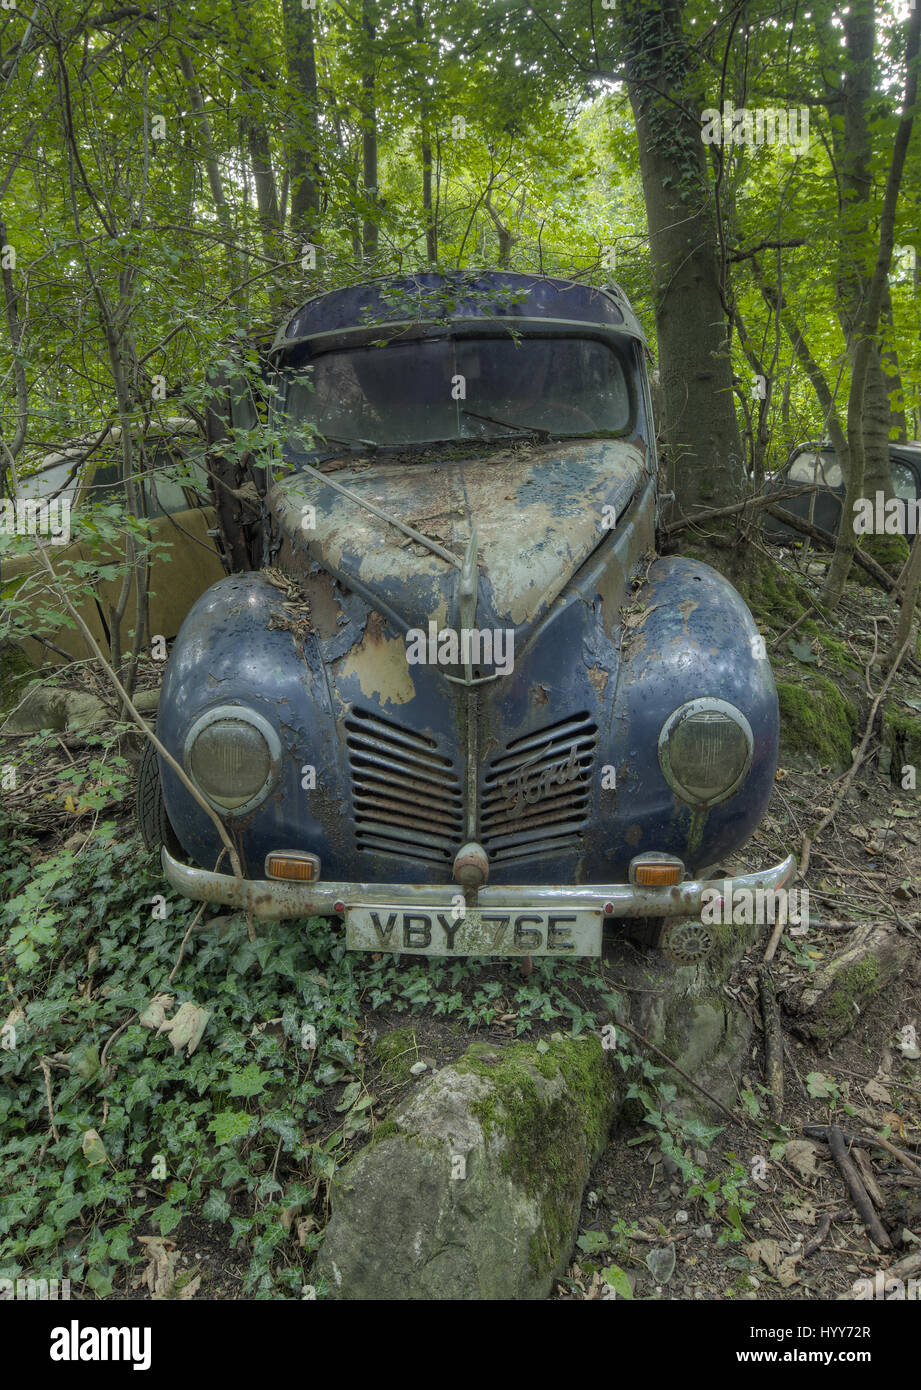 A Ford vehicle has been taken over by nature. STUNNING images reveal the vulnerable beauty of abandoned cars that have been left to rust over the years. The collection of spectacular images show how a Volkswagen Beetle, Citroën C2 and even a Ferrari have been taken over by nature and piles of rubble. In other shots, a Mercedes Benz is overgrown with ivy and an old-fashioned BMW has been left in a garage with a collapsing roof and debris on the floor. A Ford vehicle has also been forgotten in the woods and one car even appears to have a tree growing from it. The haunting images were taken by Be Stock Photo